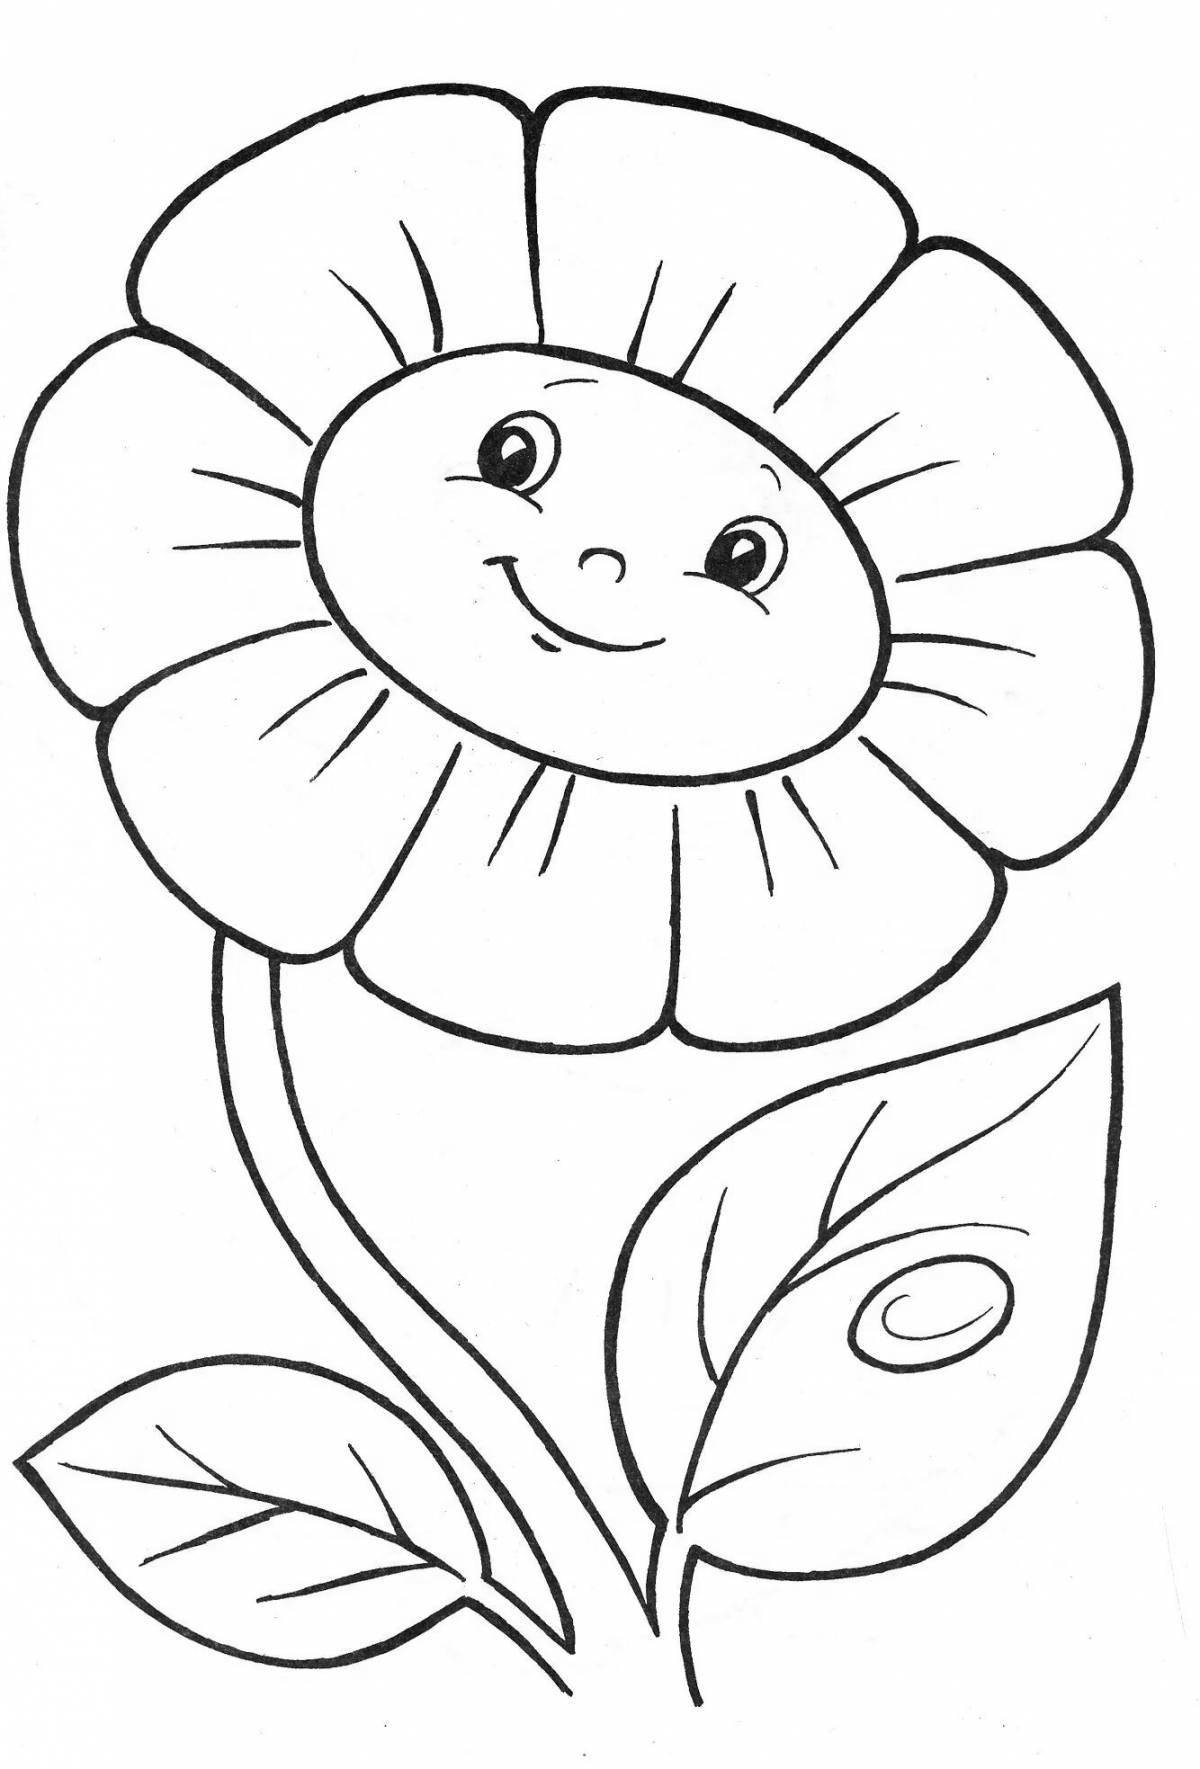 Exotic flowers coloring pages for children 2-3 years old